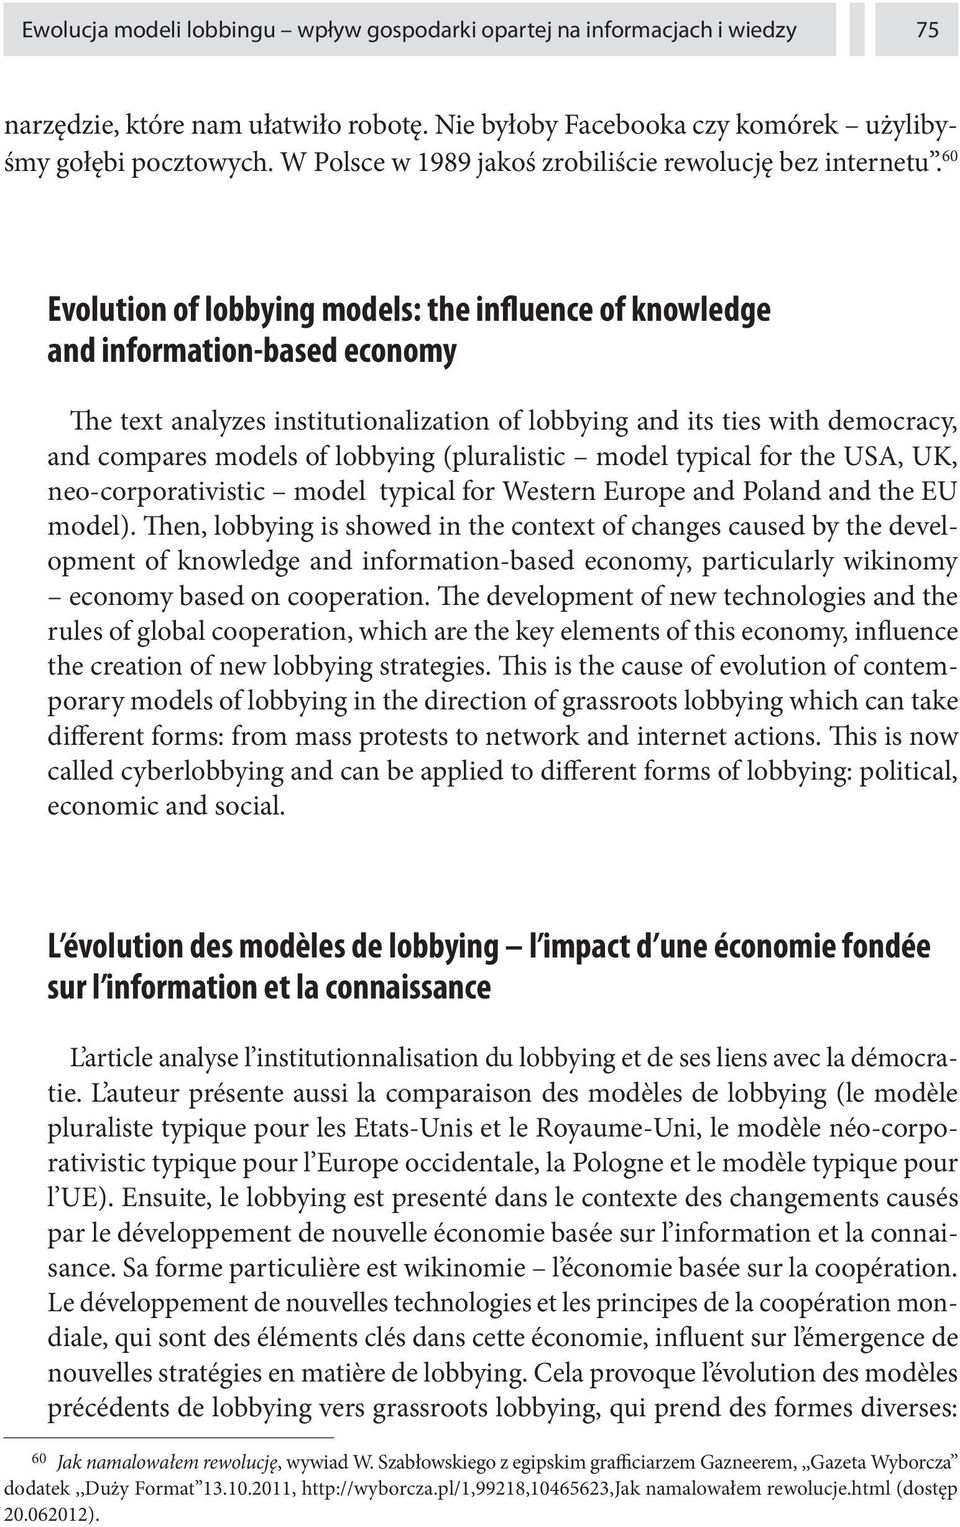 60 Evolution of lobbying models: the influence of knowledge and information-based economy The text analyzes institutionalization of lobbying and its ties with democracy, and compares models of